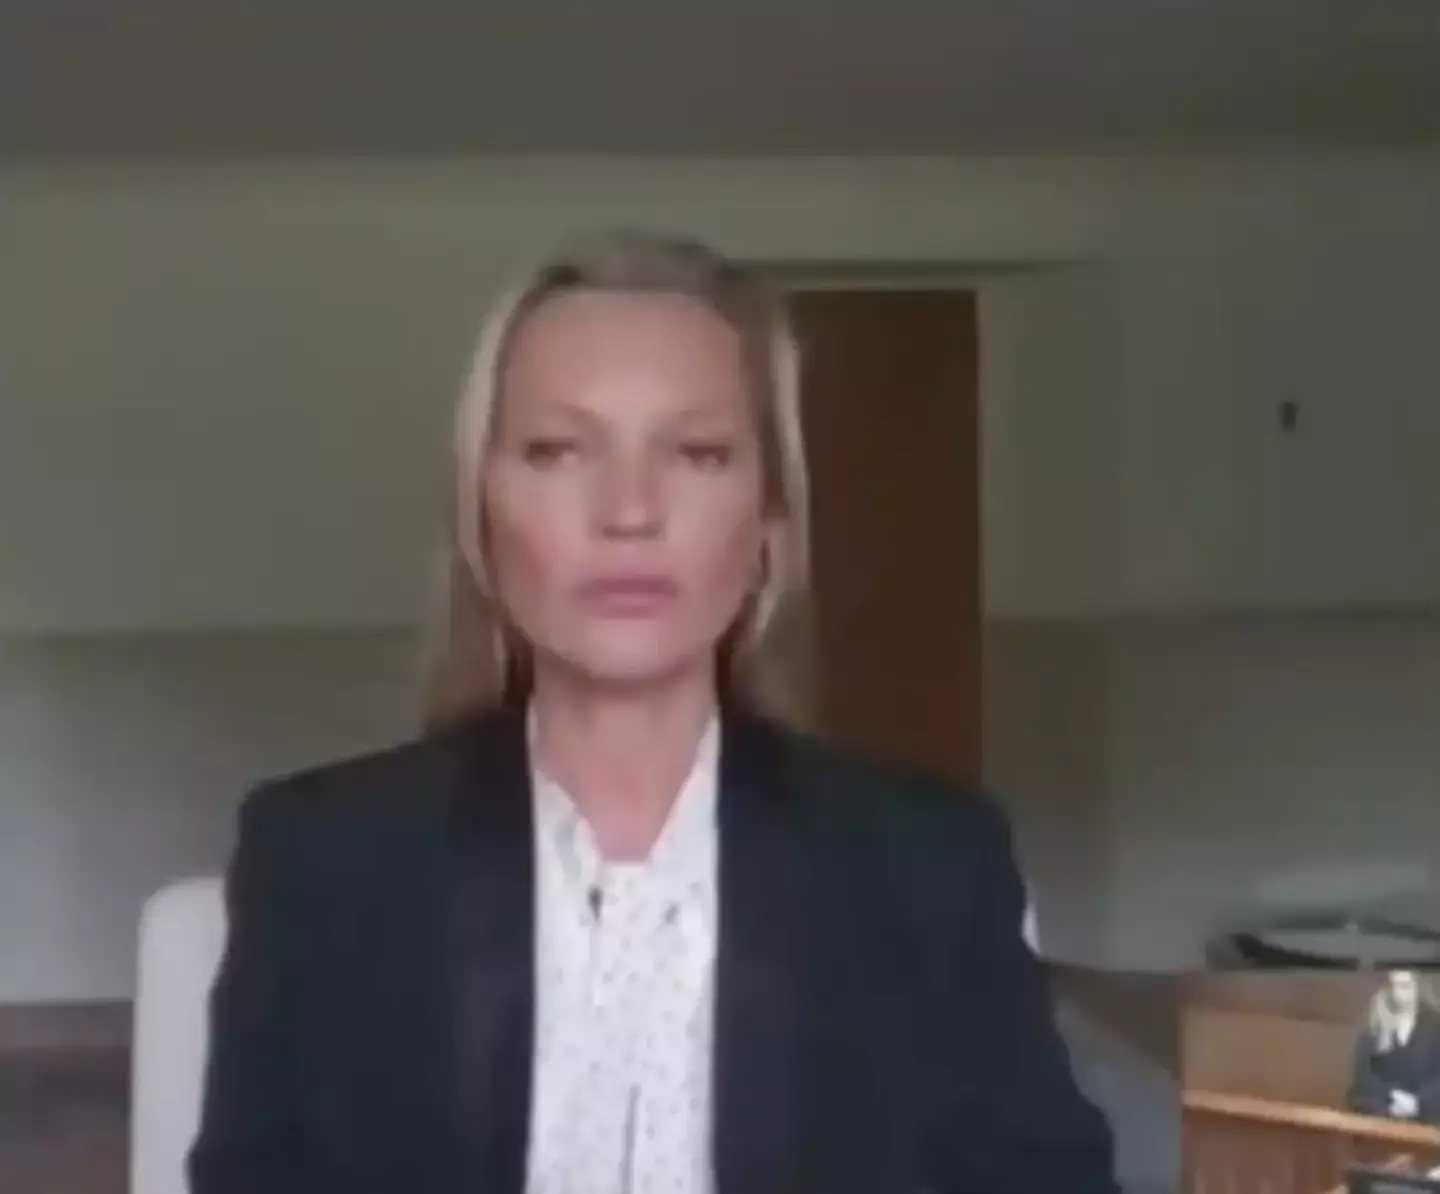 Previously, Kate Moss was called to the stand and testified as a rebuttal witness in support of Depp (Law and Crime Network)